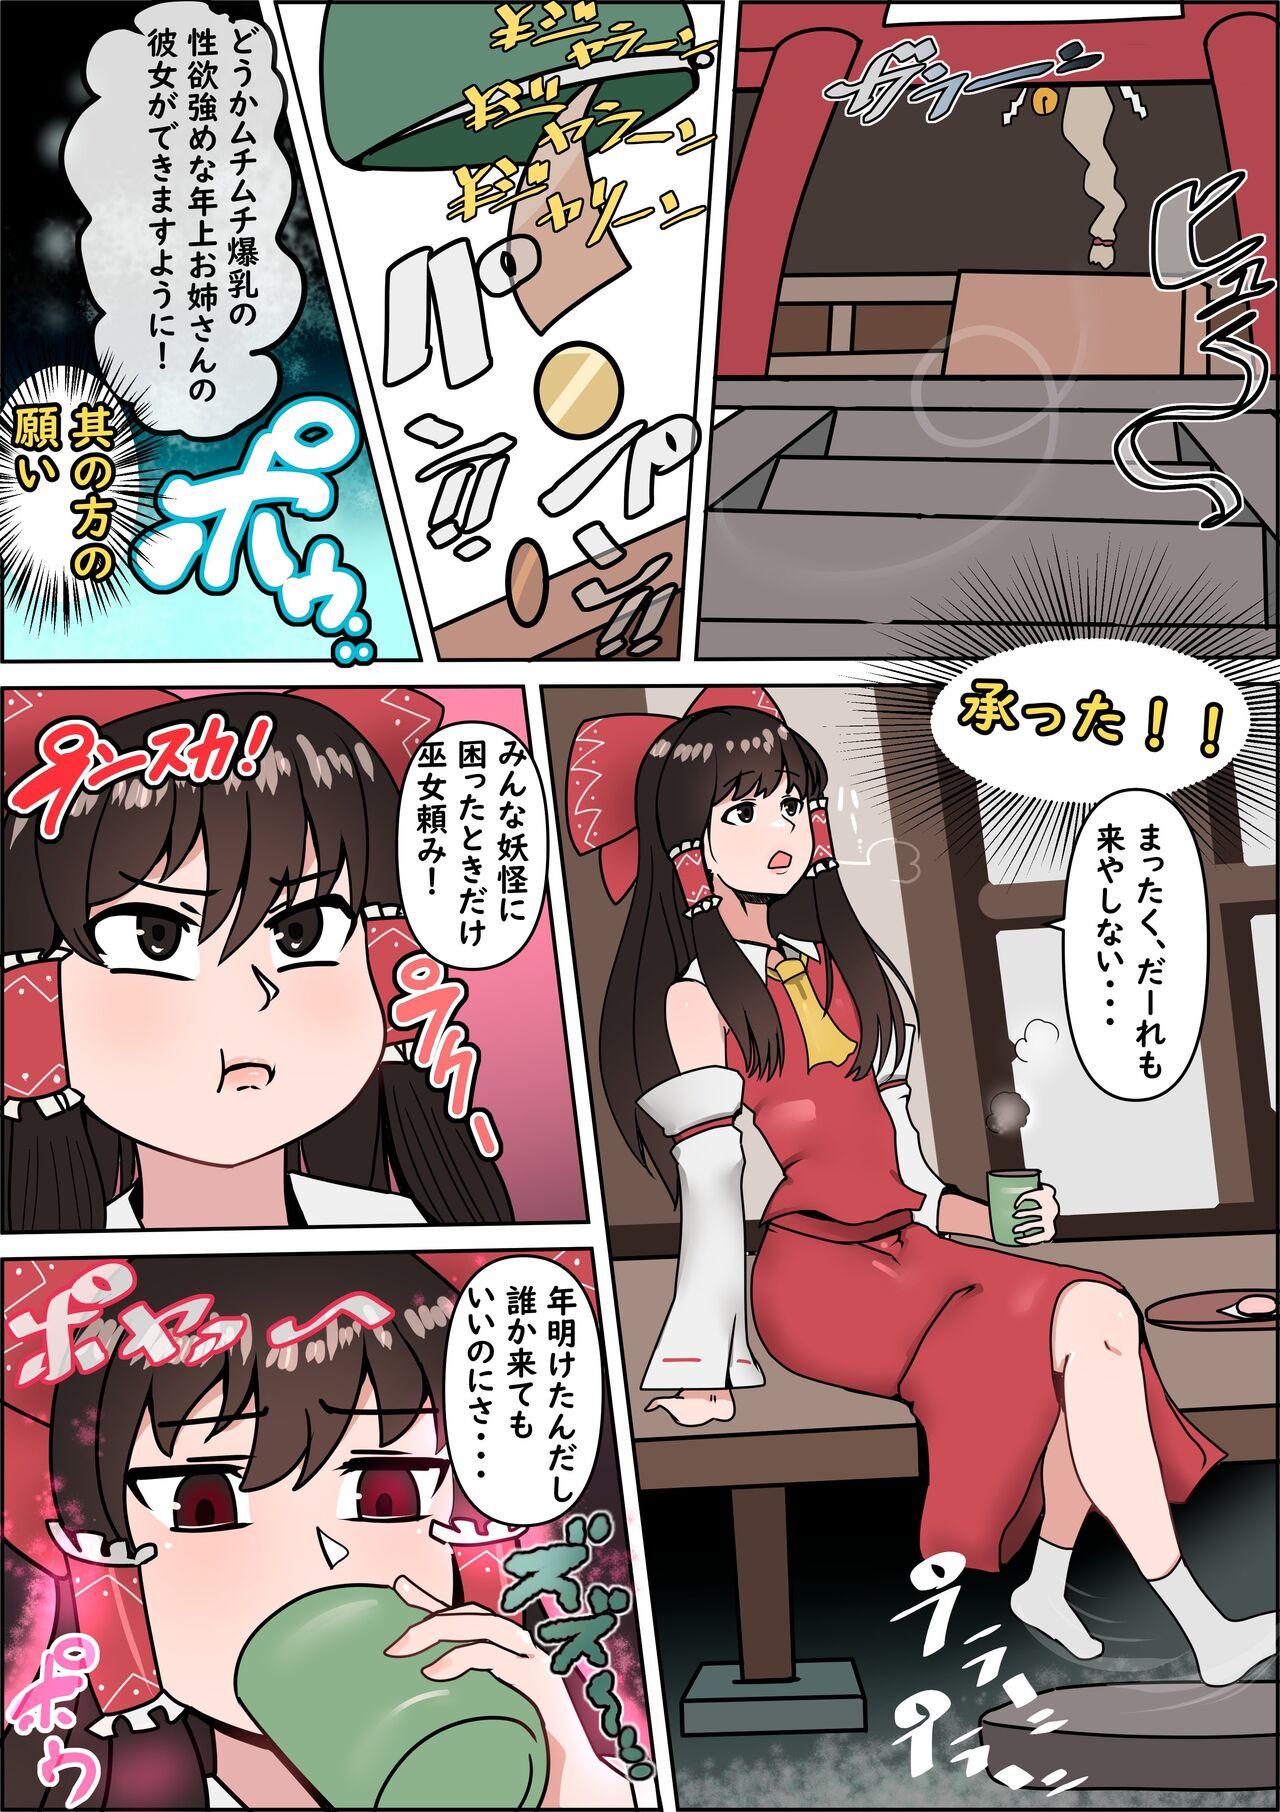 Action Reimu Hakurei gets fat and milky - Touhou project Sweet - Page 1